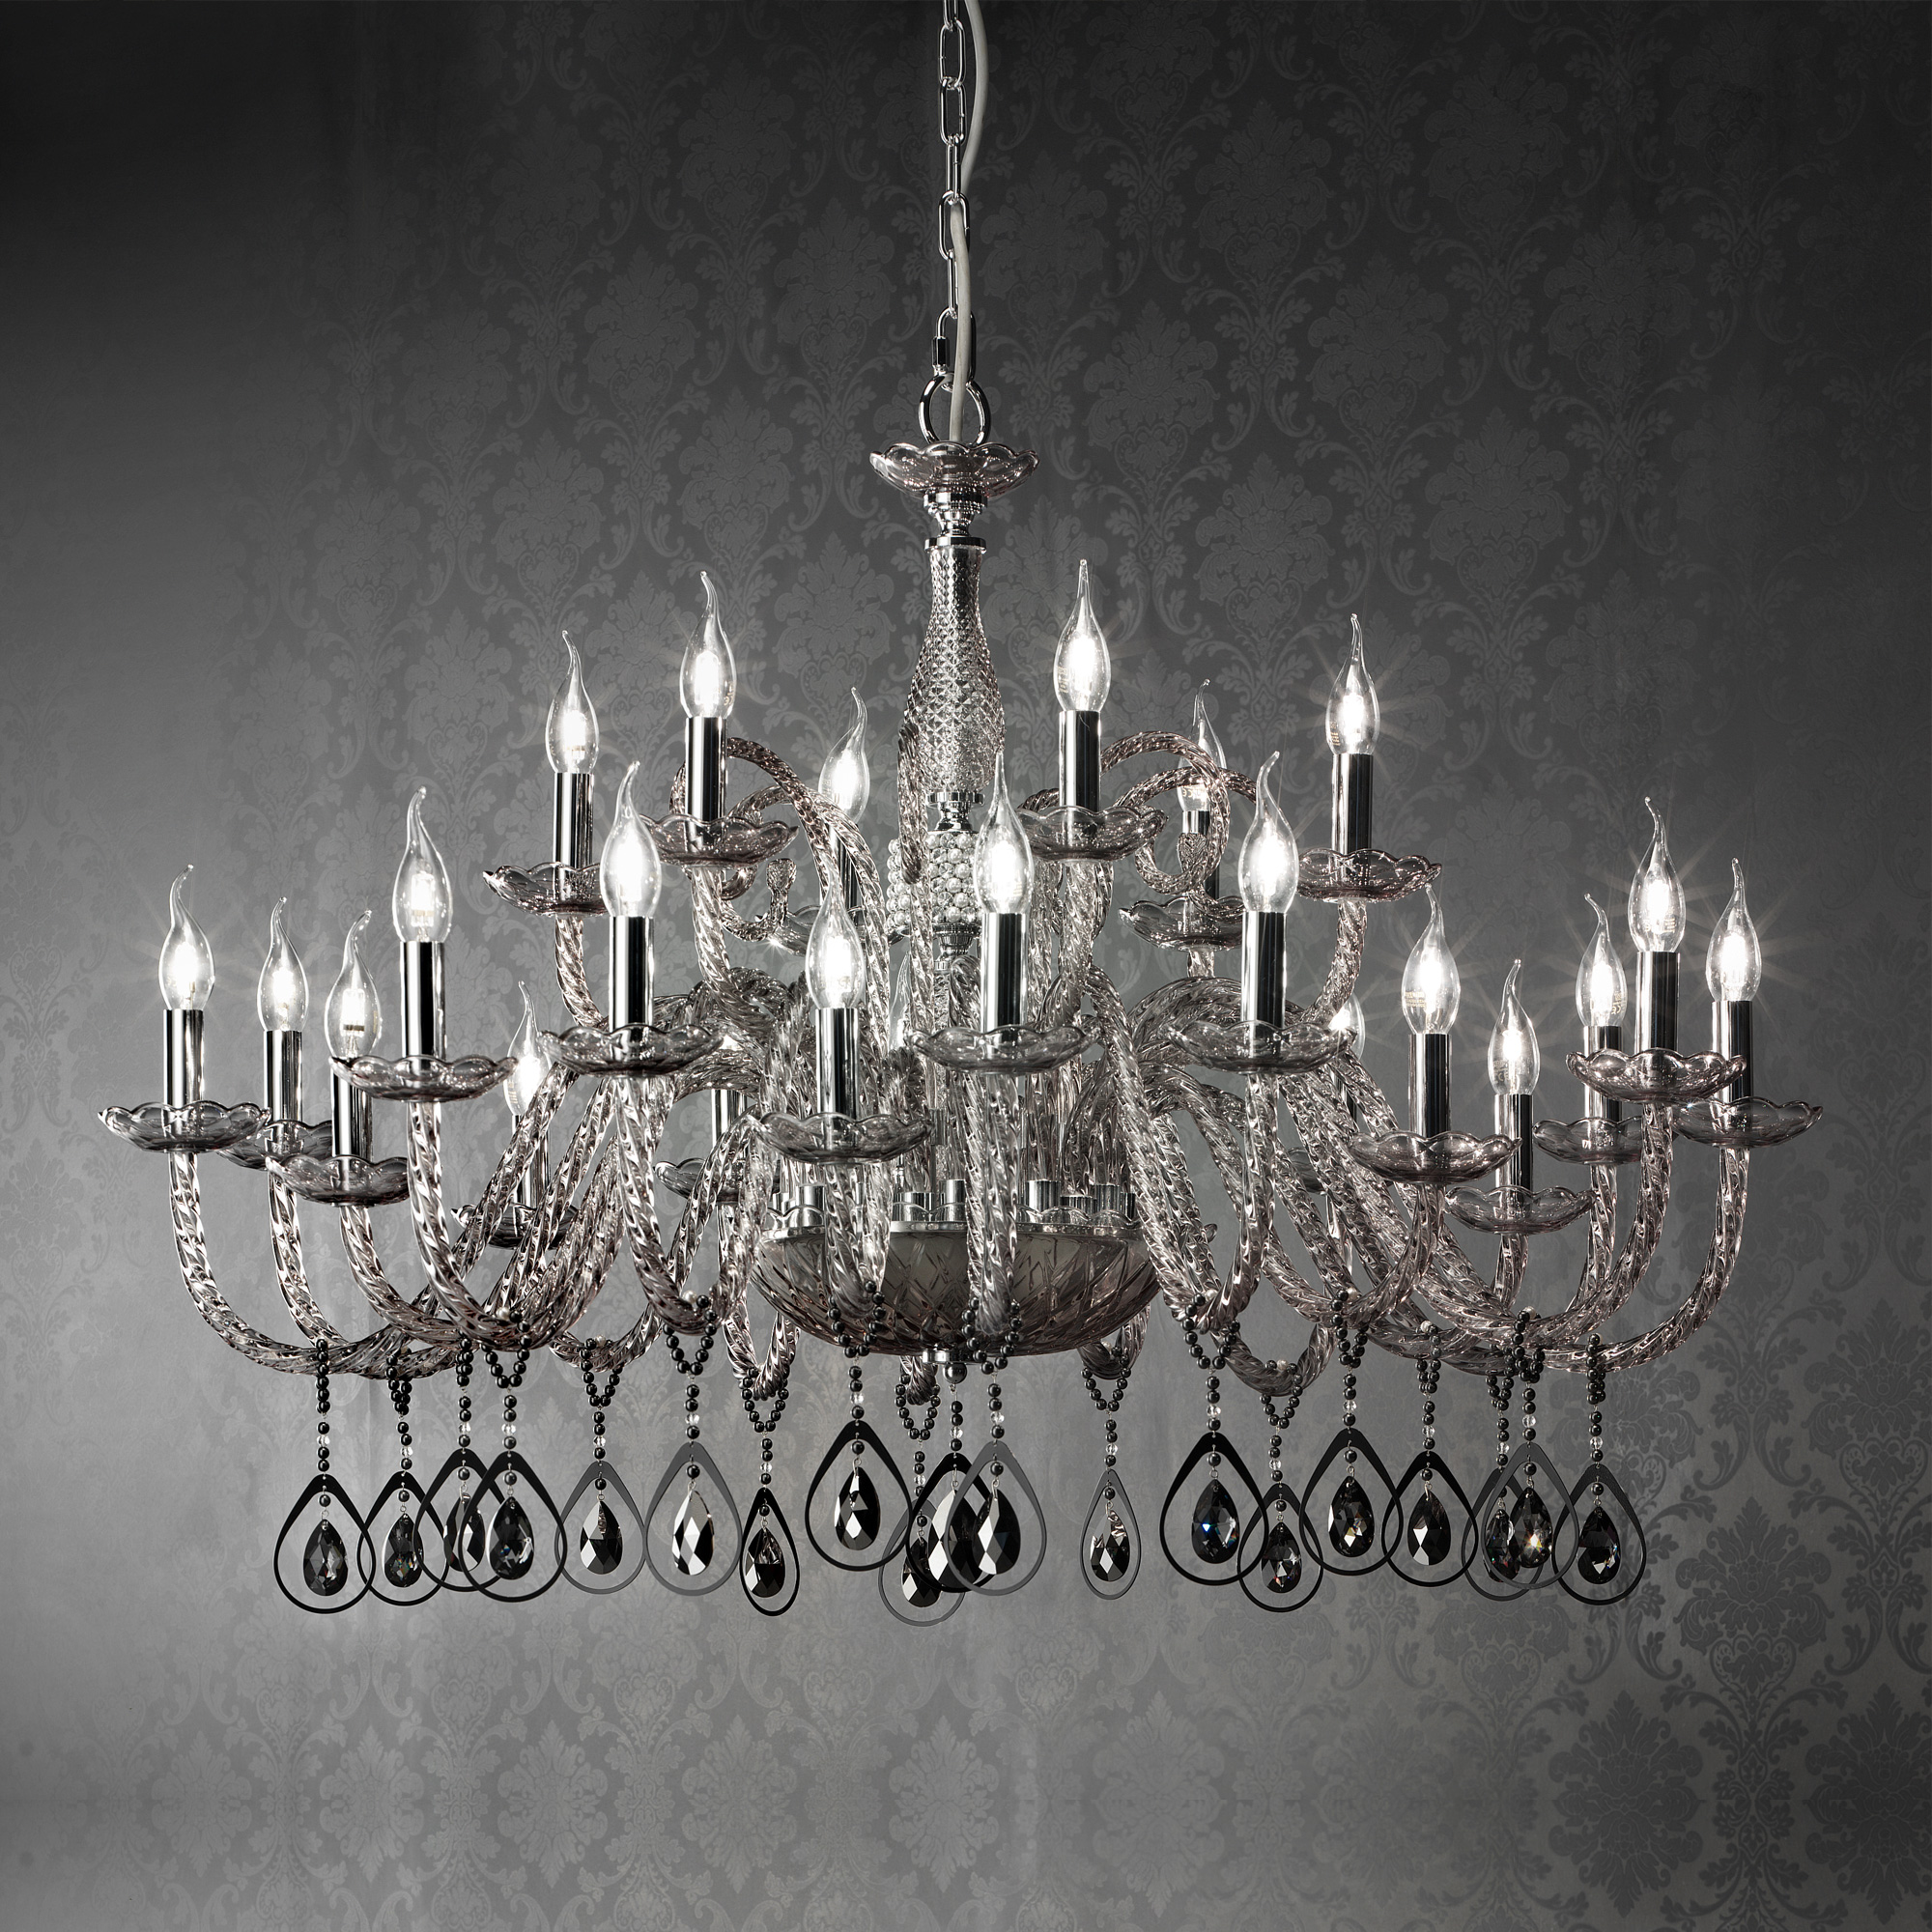 Large Smoked Glass Chandelier With Pendant Drops